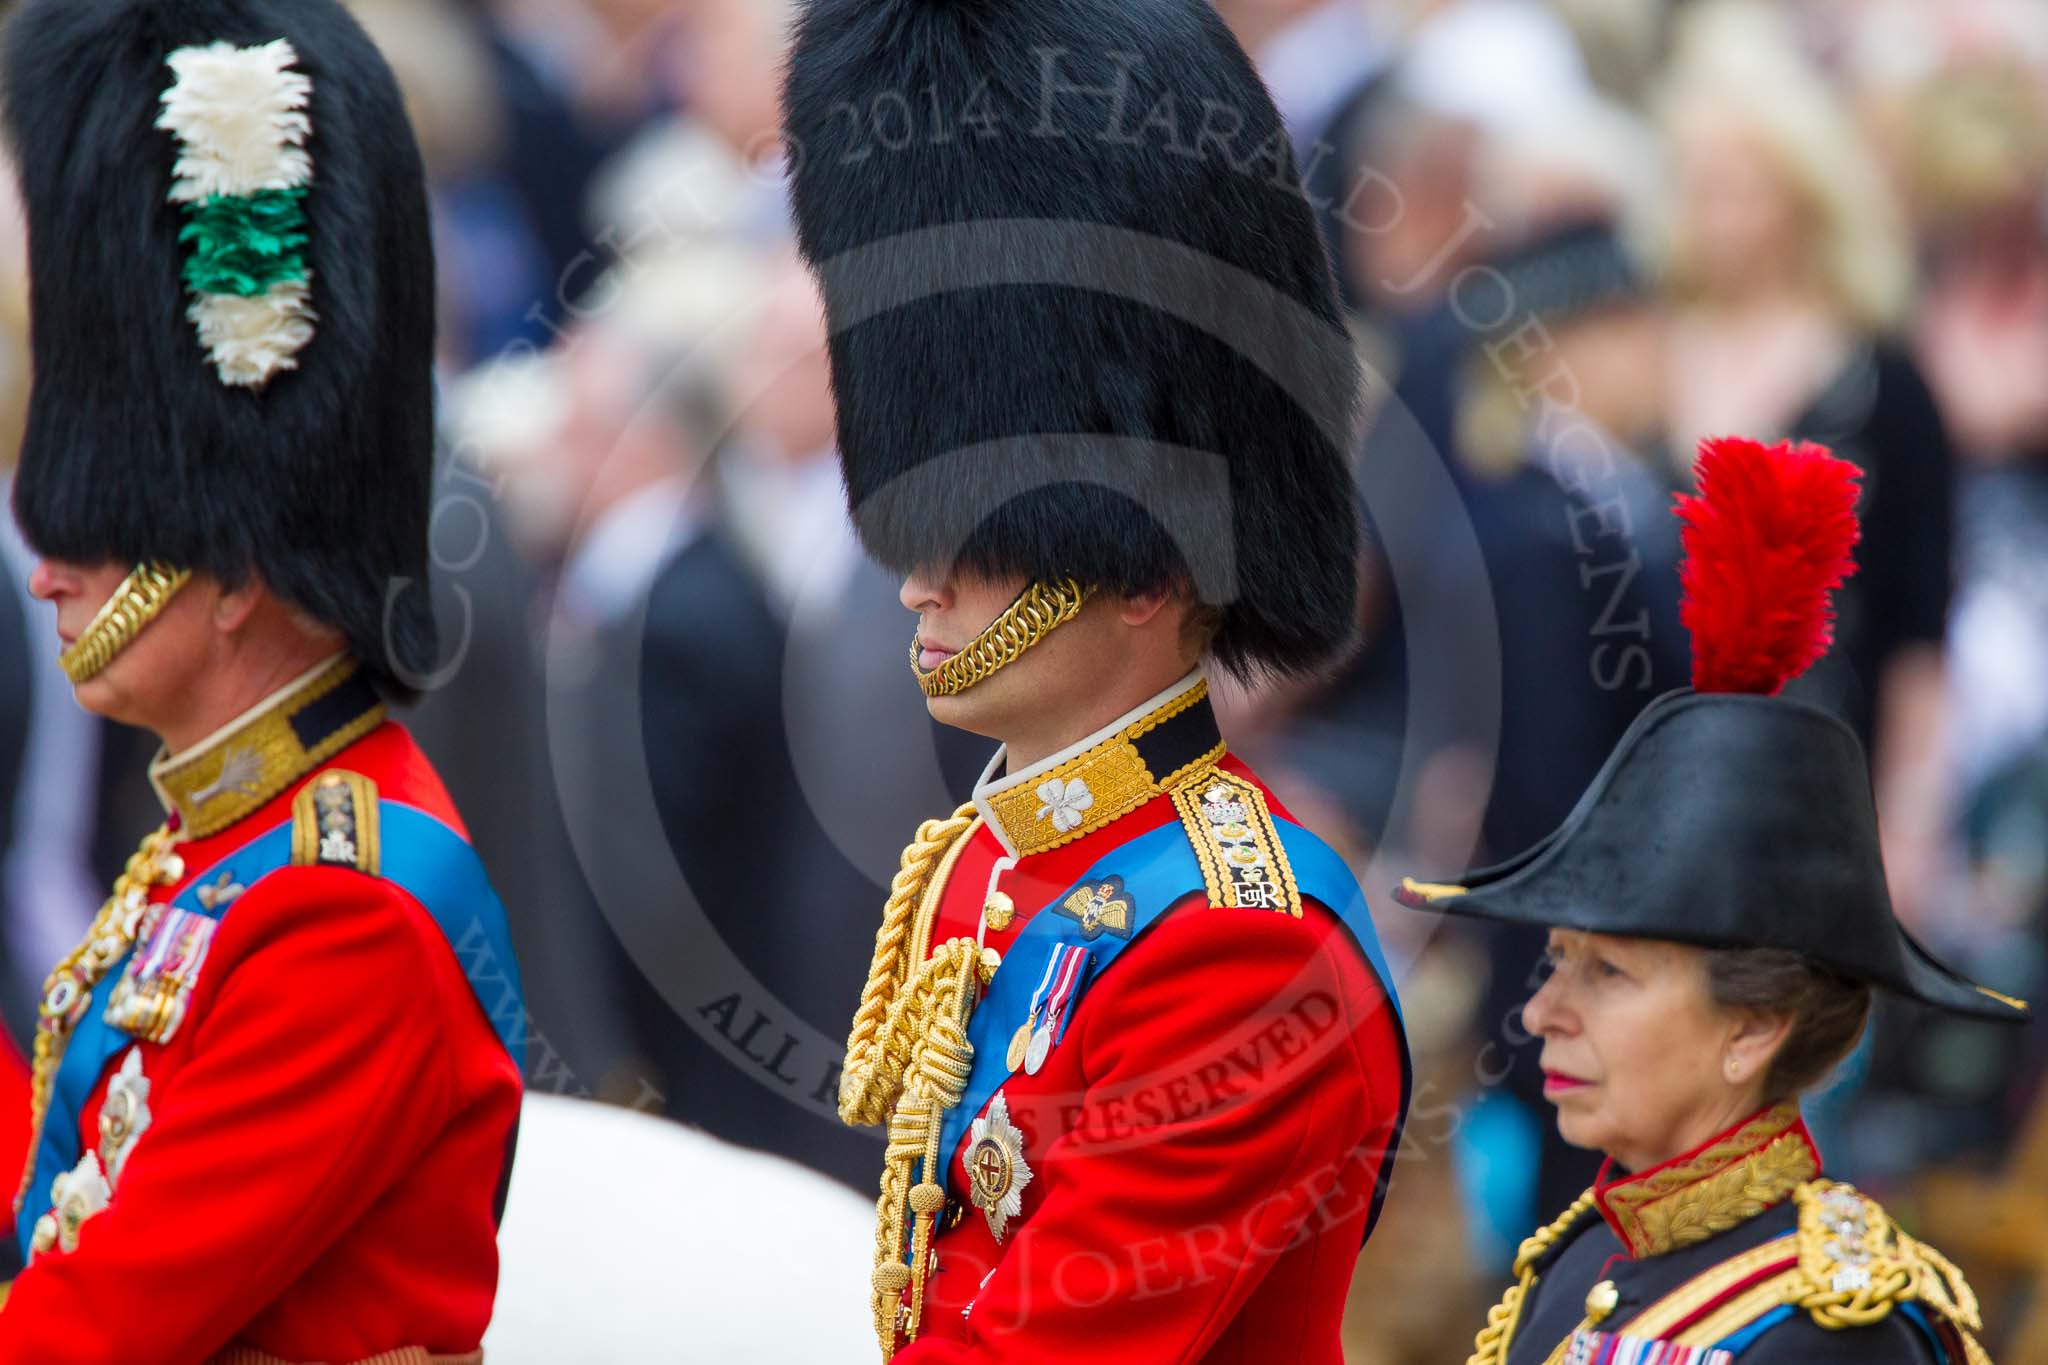 Trooping the Colour 2014.
Horse Guards Parade, Westminster,
London SW1A,

United Kingdom,
on 14 June 2014 at 11:01, image #380